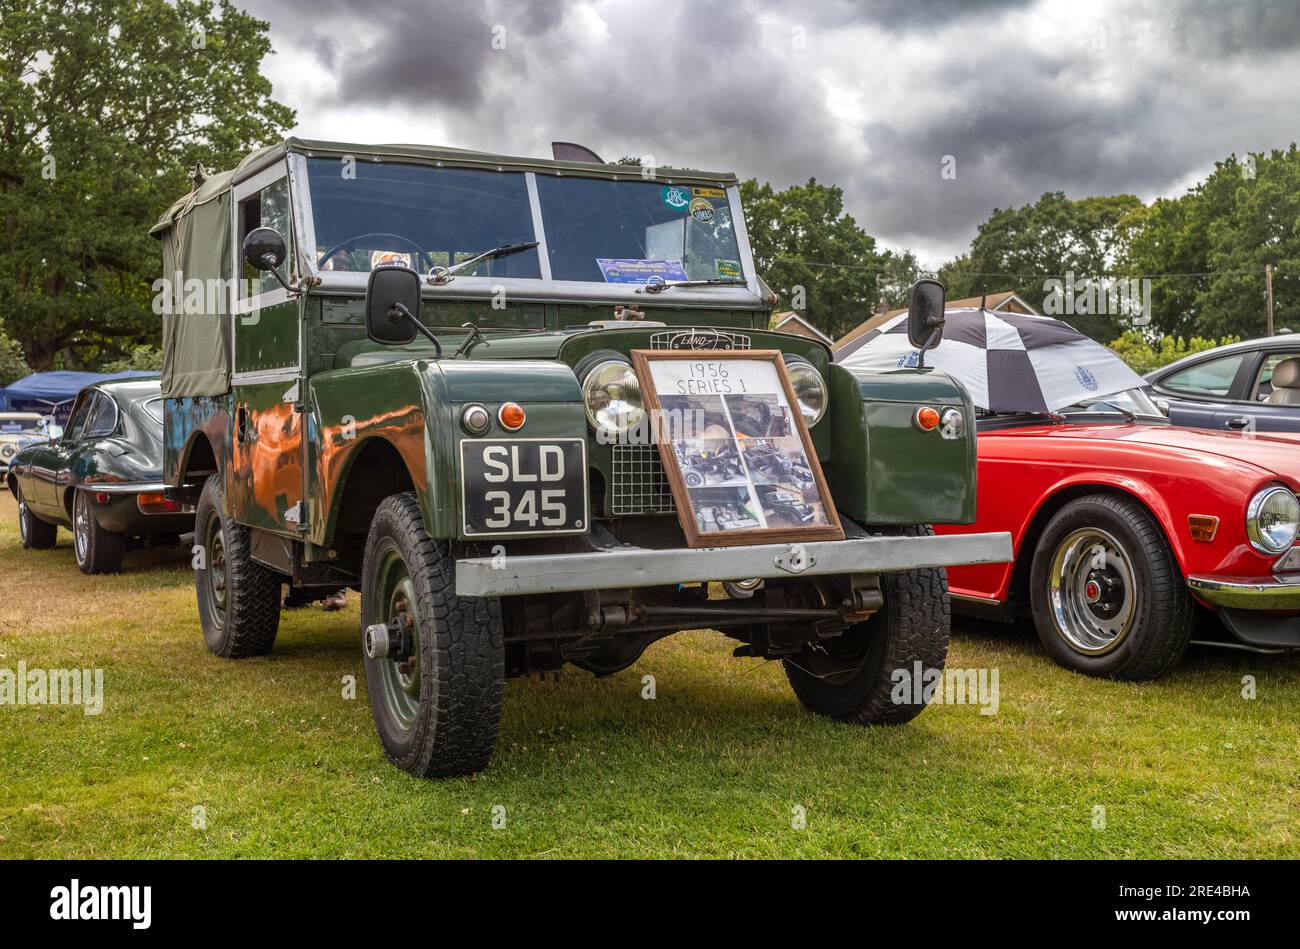 A 1956 Series 1 Land Rover car with its sturdy chassis and green aluminium body on display at a classic car show in Storrington, West Sussex, UK. Stock Photo